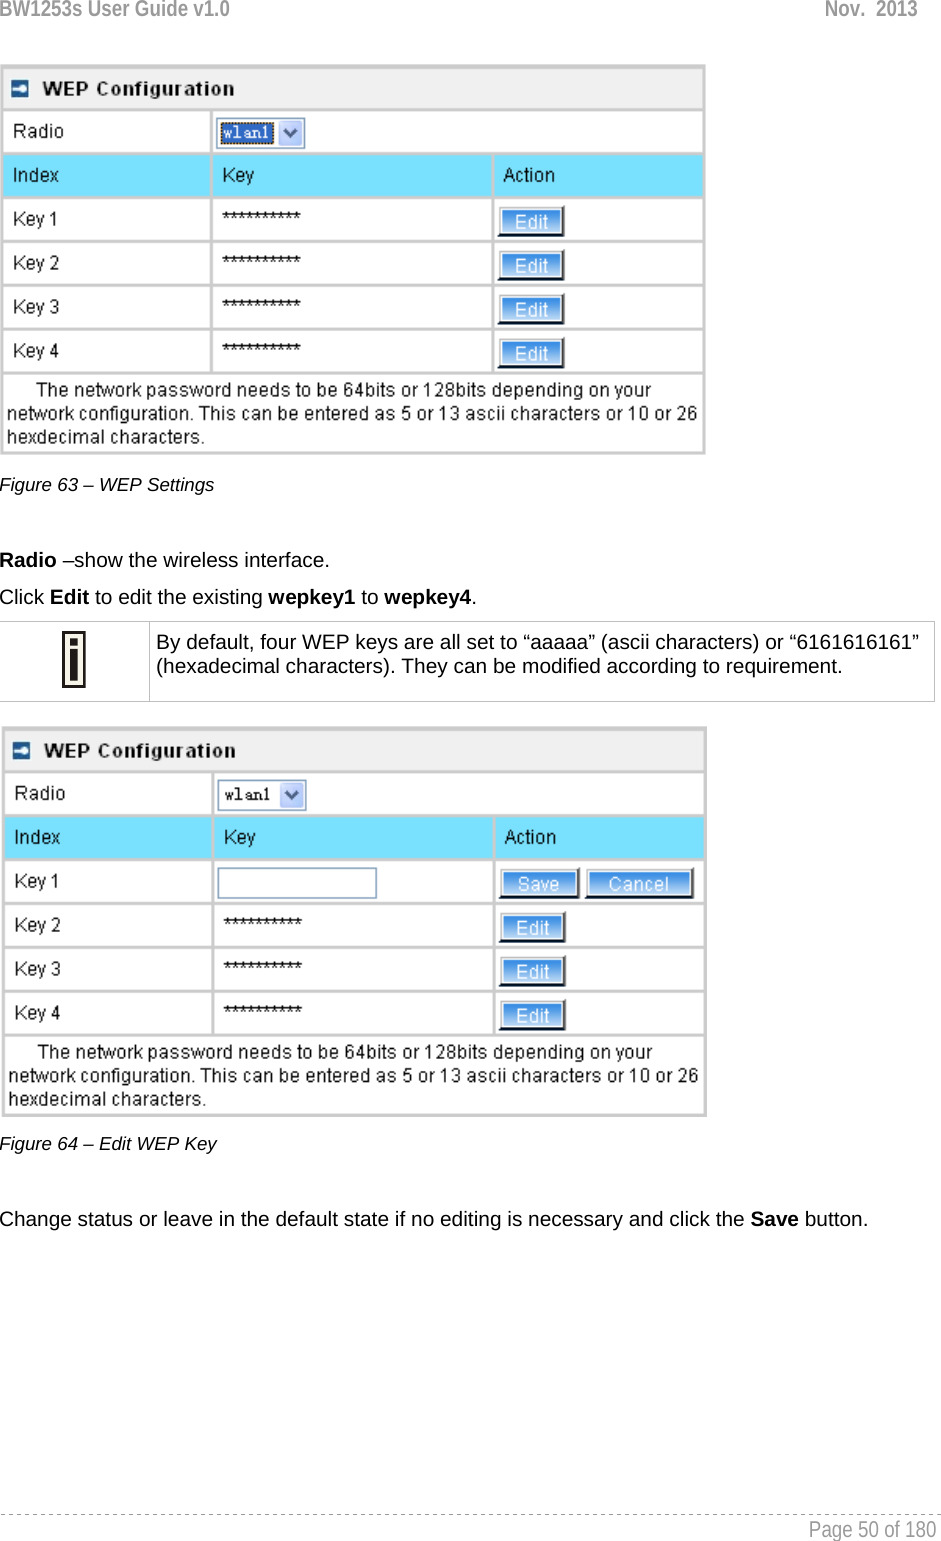 BW1253s User Guide v1.0  Nov.  2013     Page 50 of 180    Figure 63 – WEP Settings  Radio –show the wireless interface. Click Edit to edit the existing wepkey1 to wepkey4.   By default, four WEP keys are all set to “aaaaa” (ascii characters) or “6161616161” (hexadecimal characters). They can be modified according to requirement.    Figure 64 – Edit WEP Key  Change status or leave in the default state if no editing is necessary and click the Save button.  